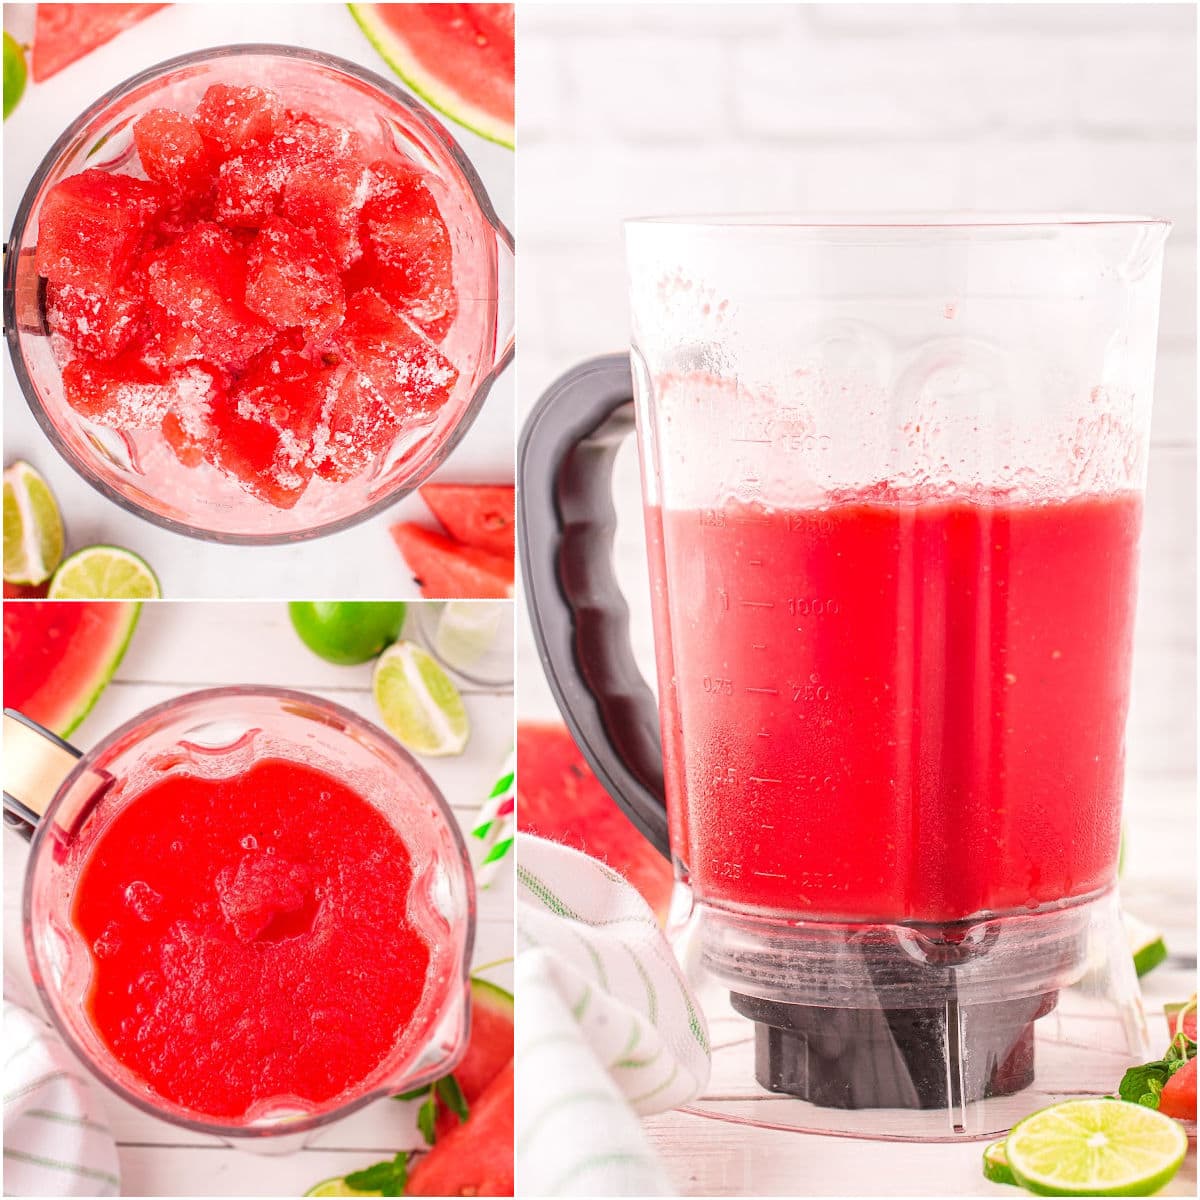 three image collage showing how to make a watermelon slushie.